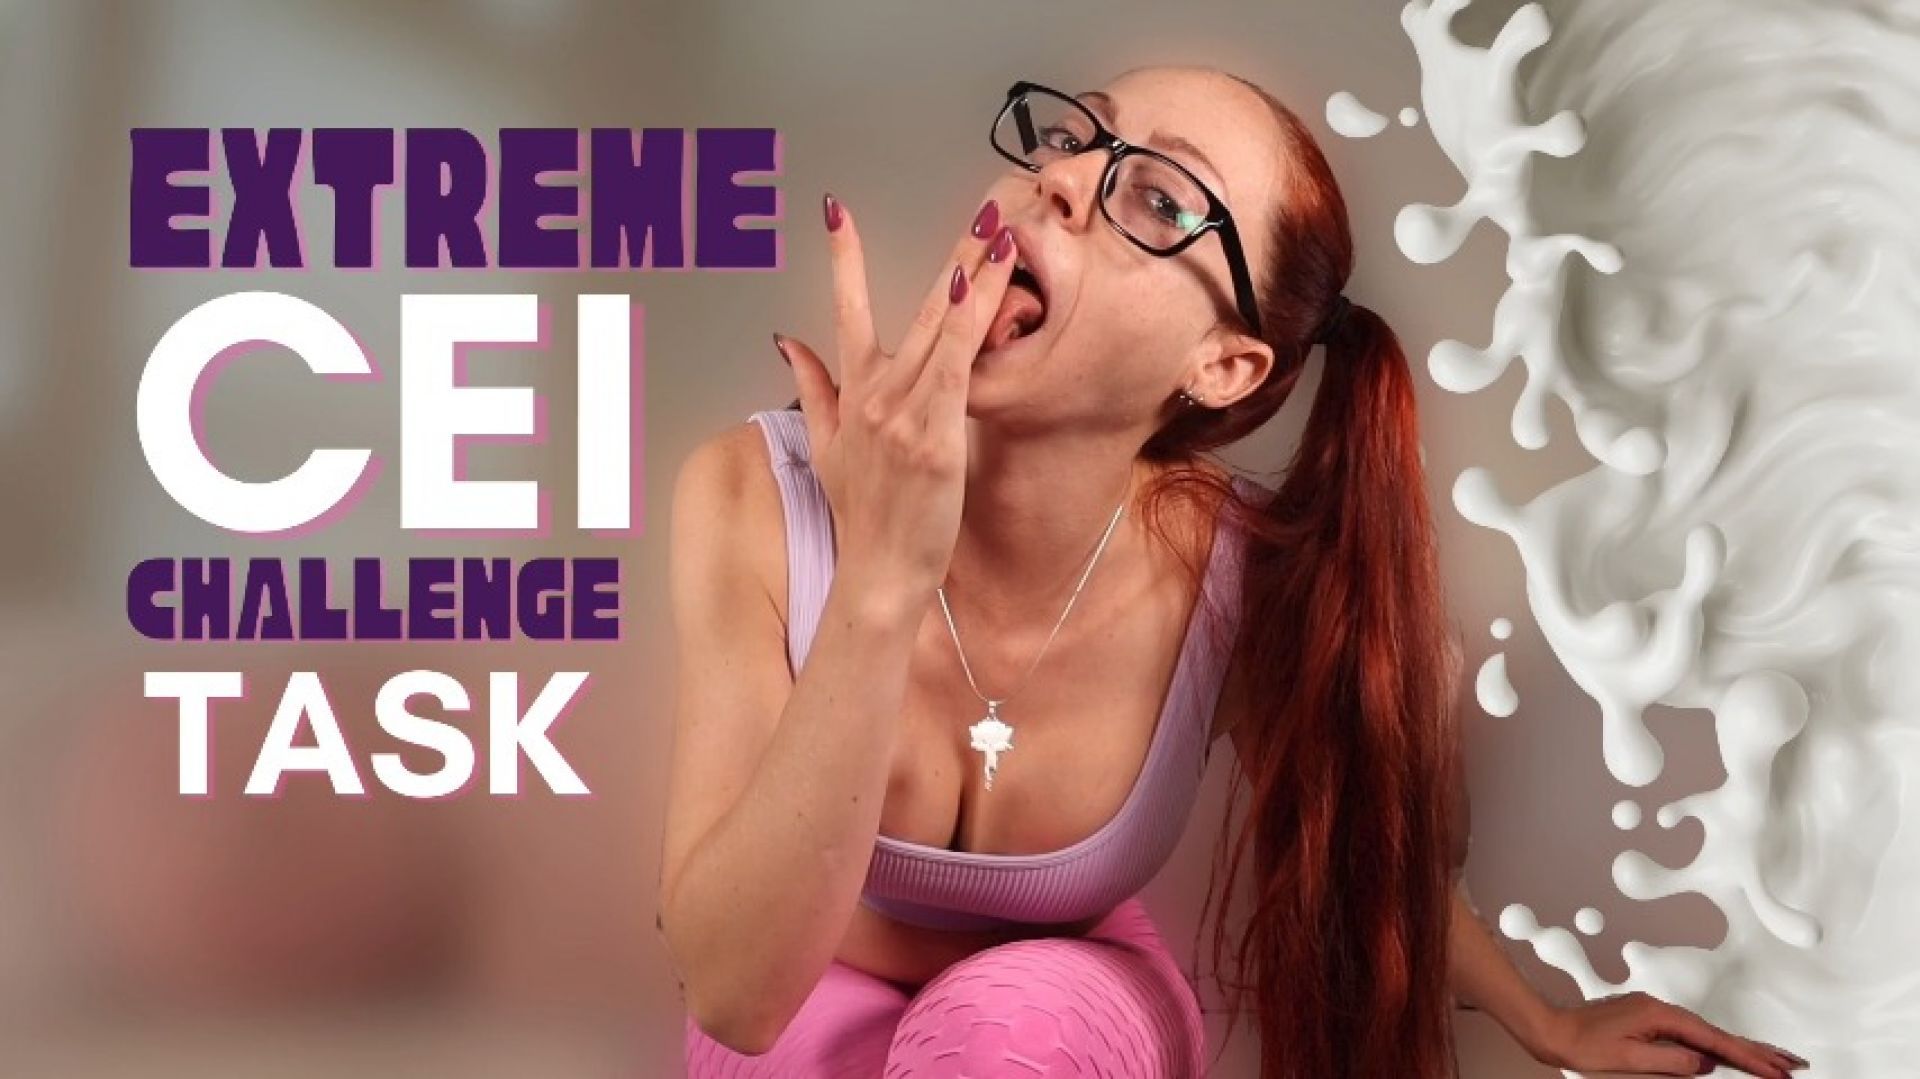 Extreme CEI JOI Challenge Task Post Cum Play